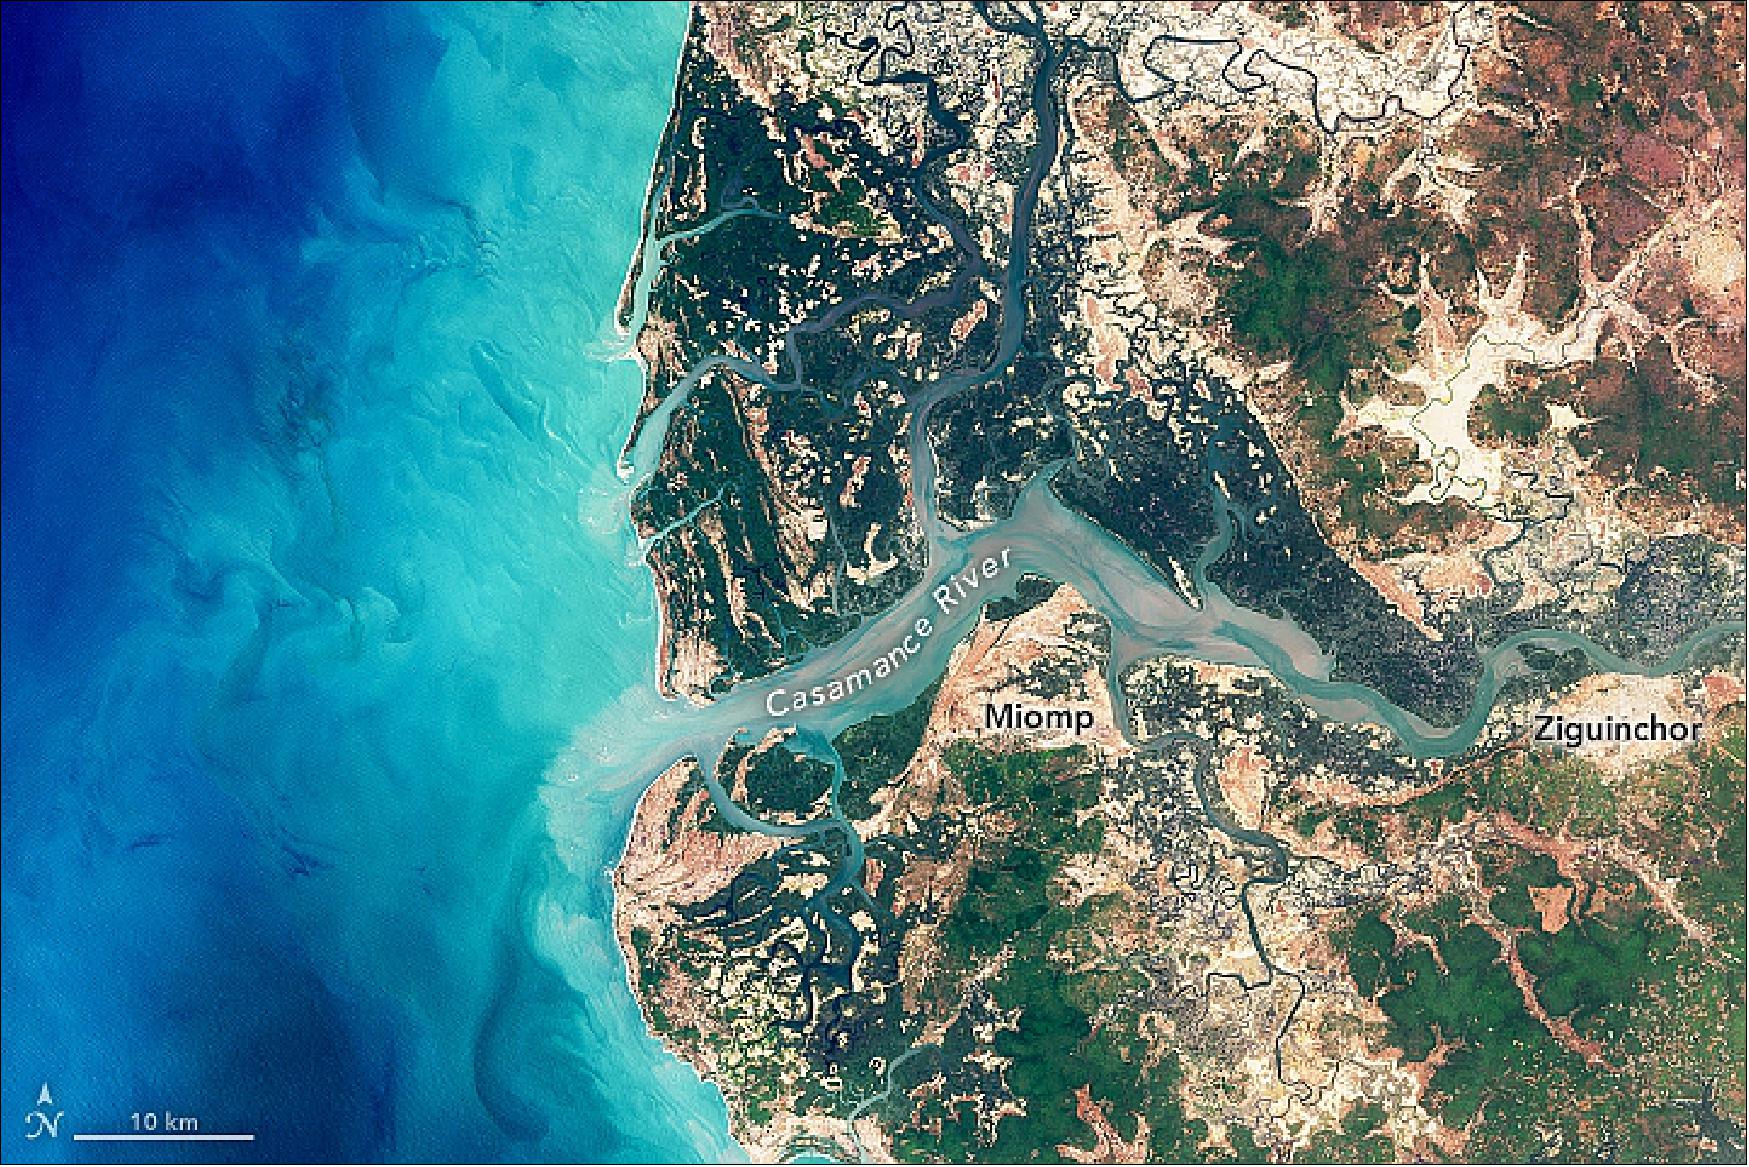 Figure 33: Natural-color image of Senegal's mangrove forests acquired with OLI on 5 March 2018 (image credit: NASA Earth Observatory, image by Joshua Stevens, using data courtesy of David Lagomasino/NASA/GSFC, and Landsat data from the USGS, story by Adam Voiland)